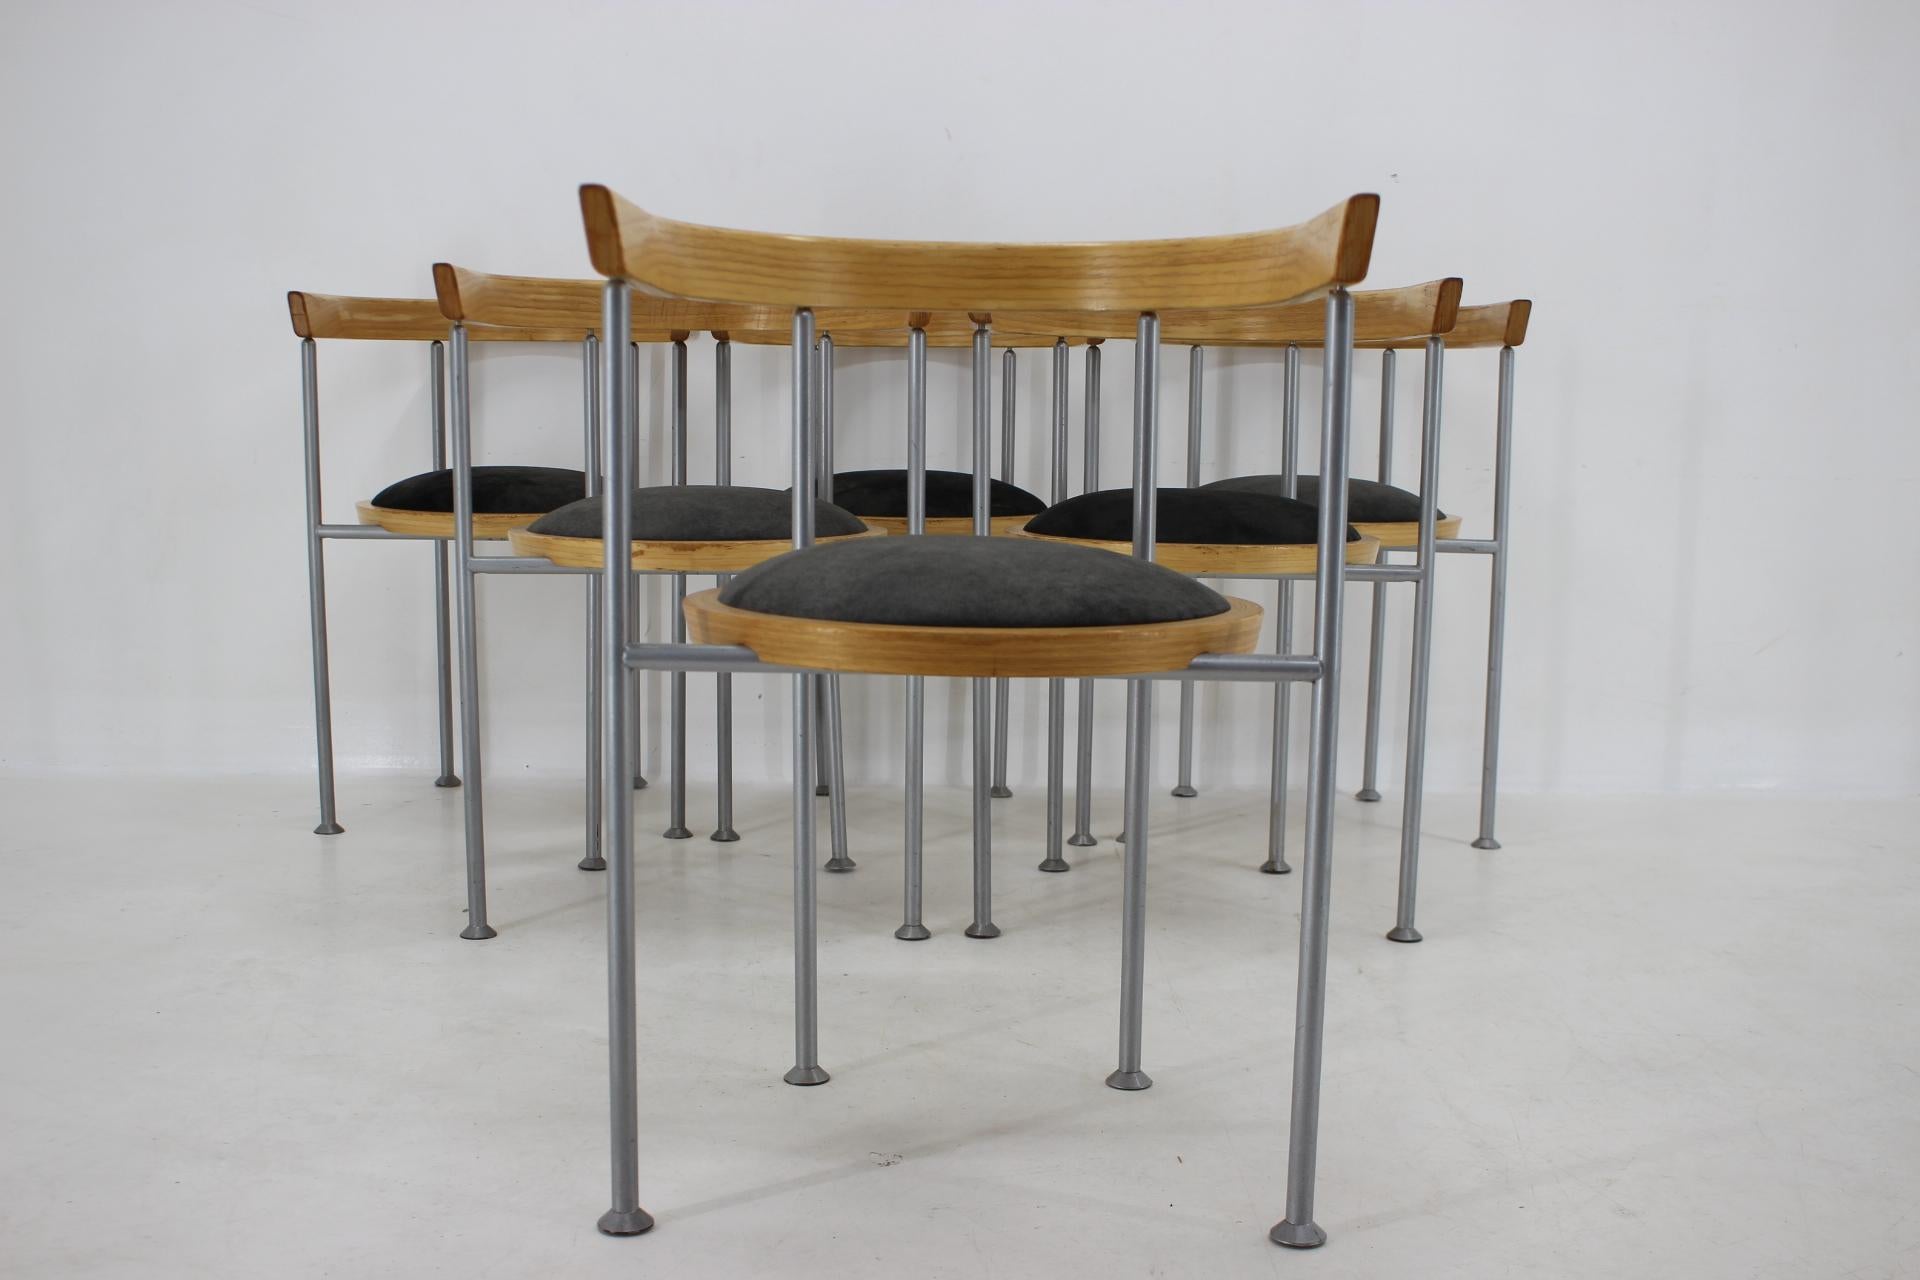 Mid-Century Modern 1990s Borge Lindau Set of 6 Dining Chairs for Bla Station, Sweden For Sale